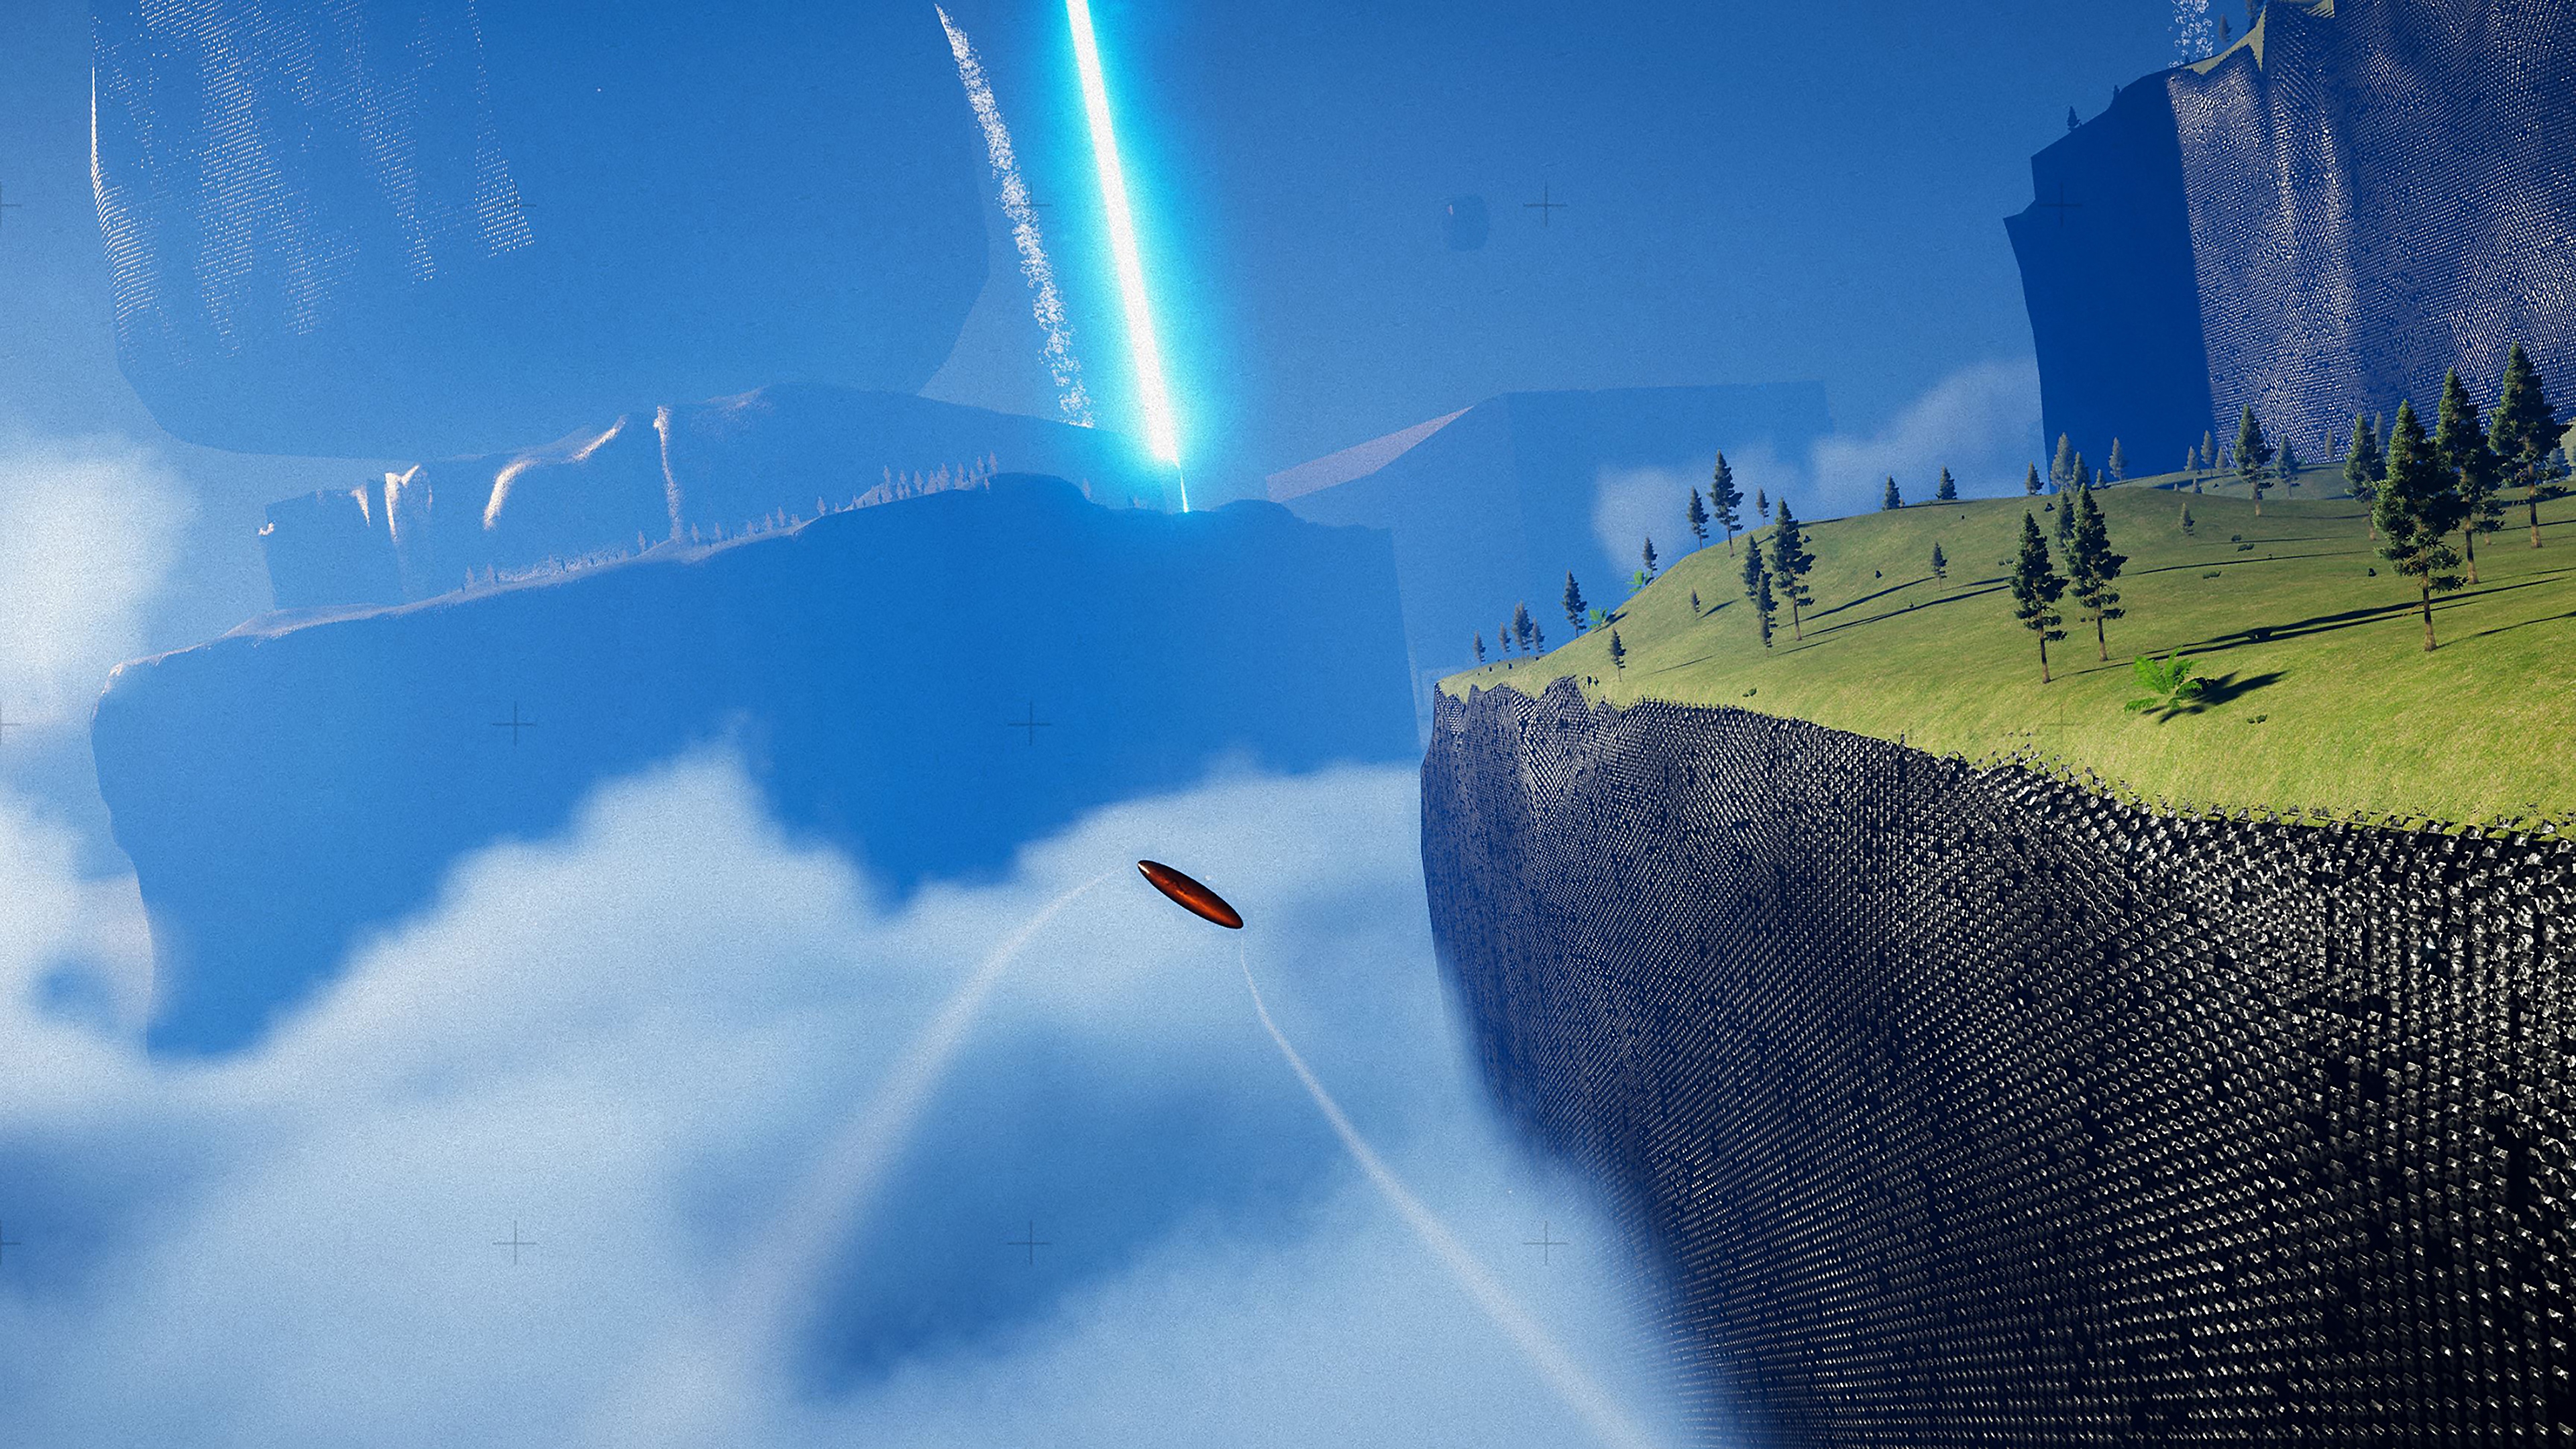 Exo One screenshot showing a flying object near a cliff edge